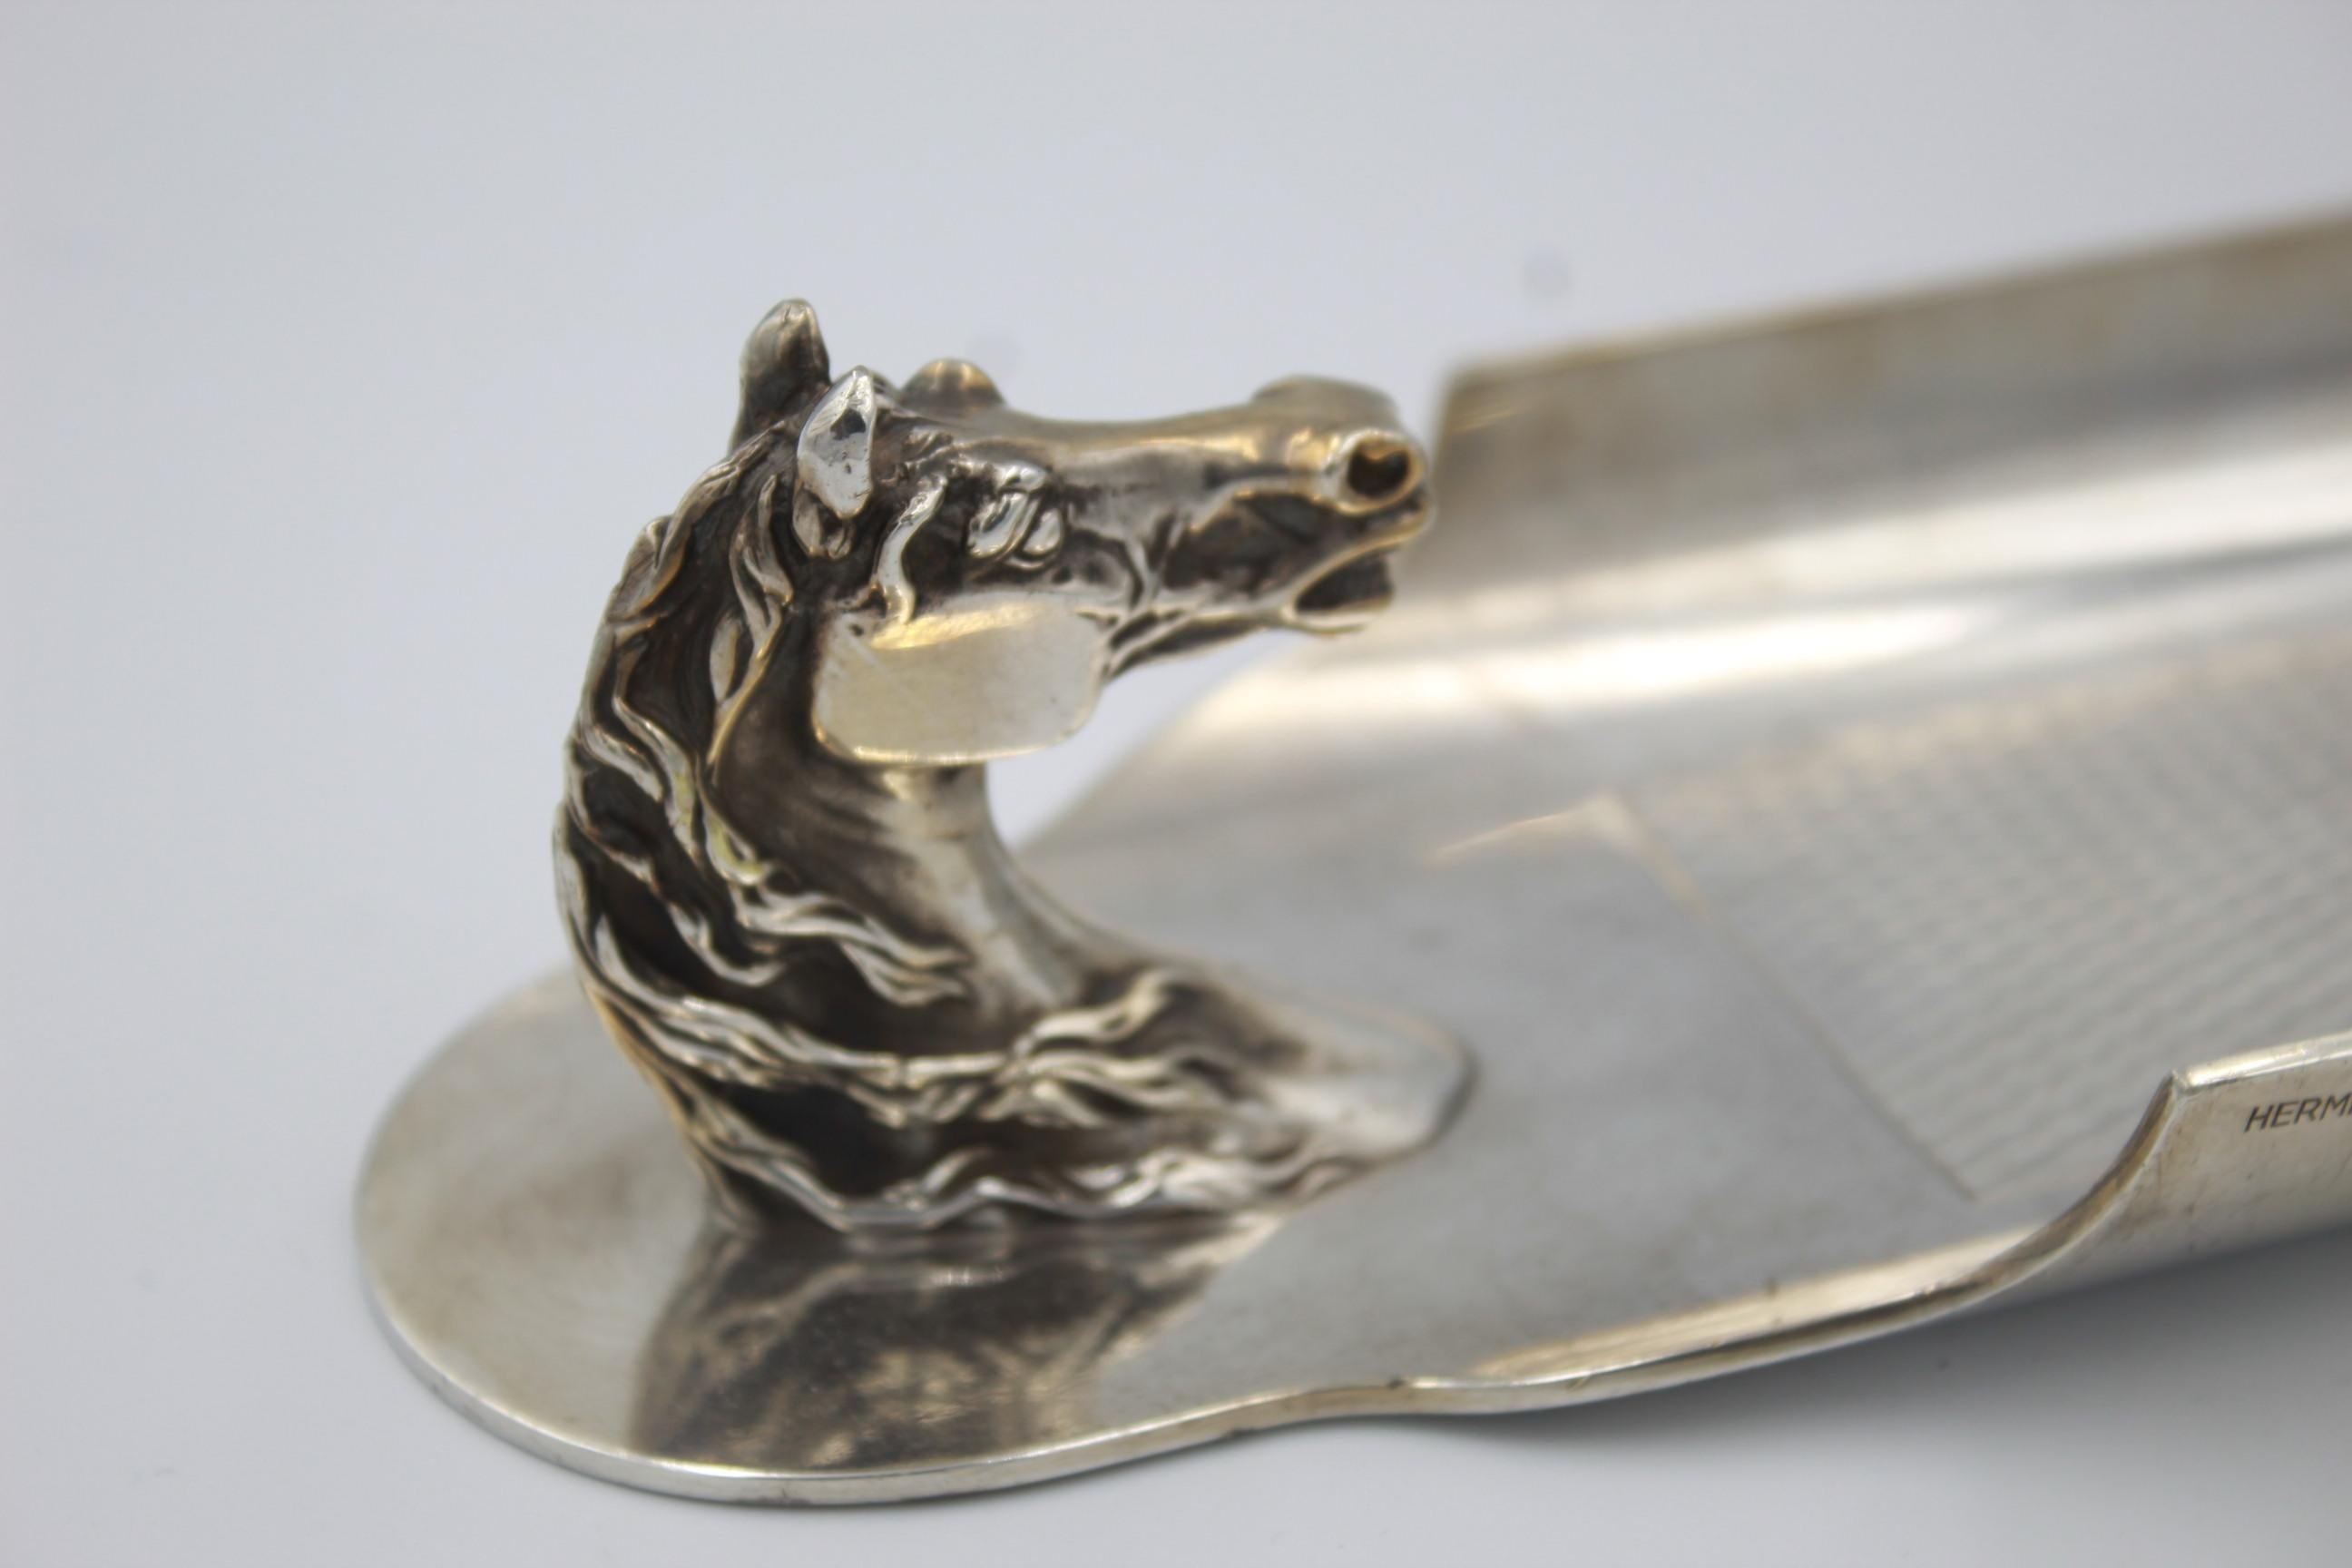 Hermes 60's Horse Head Vintage Silver Plated Pencil Tray

Good vintage condition but it presents some signs of wear

Lenght 26 cm